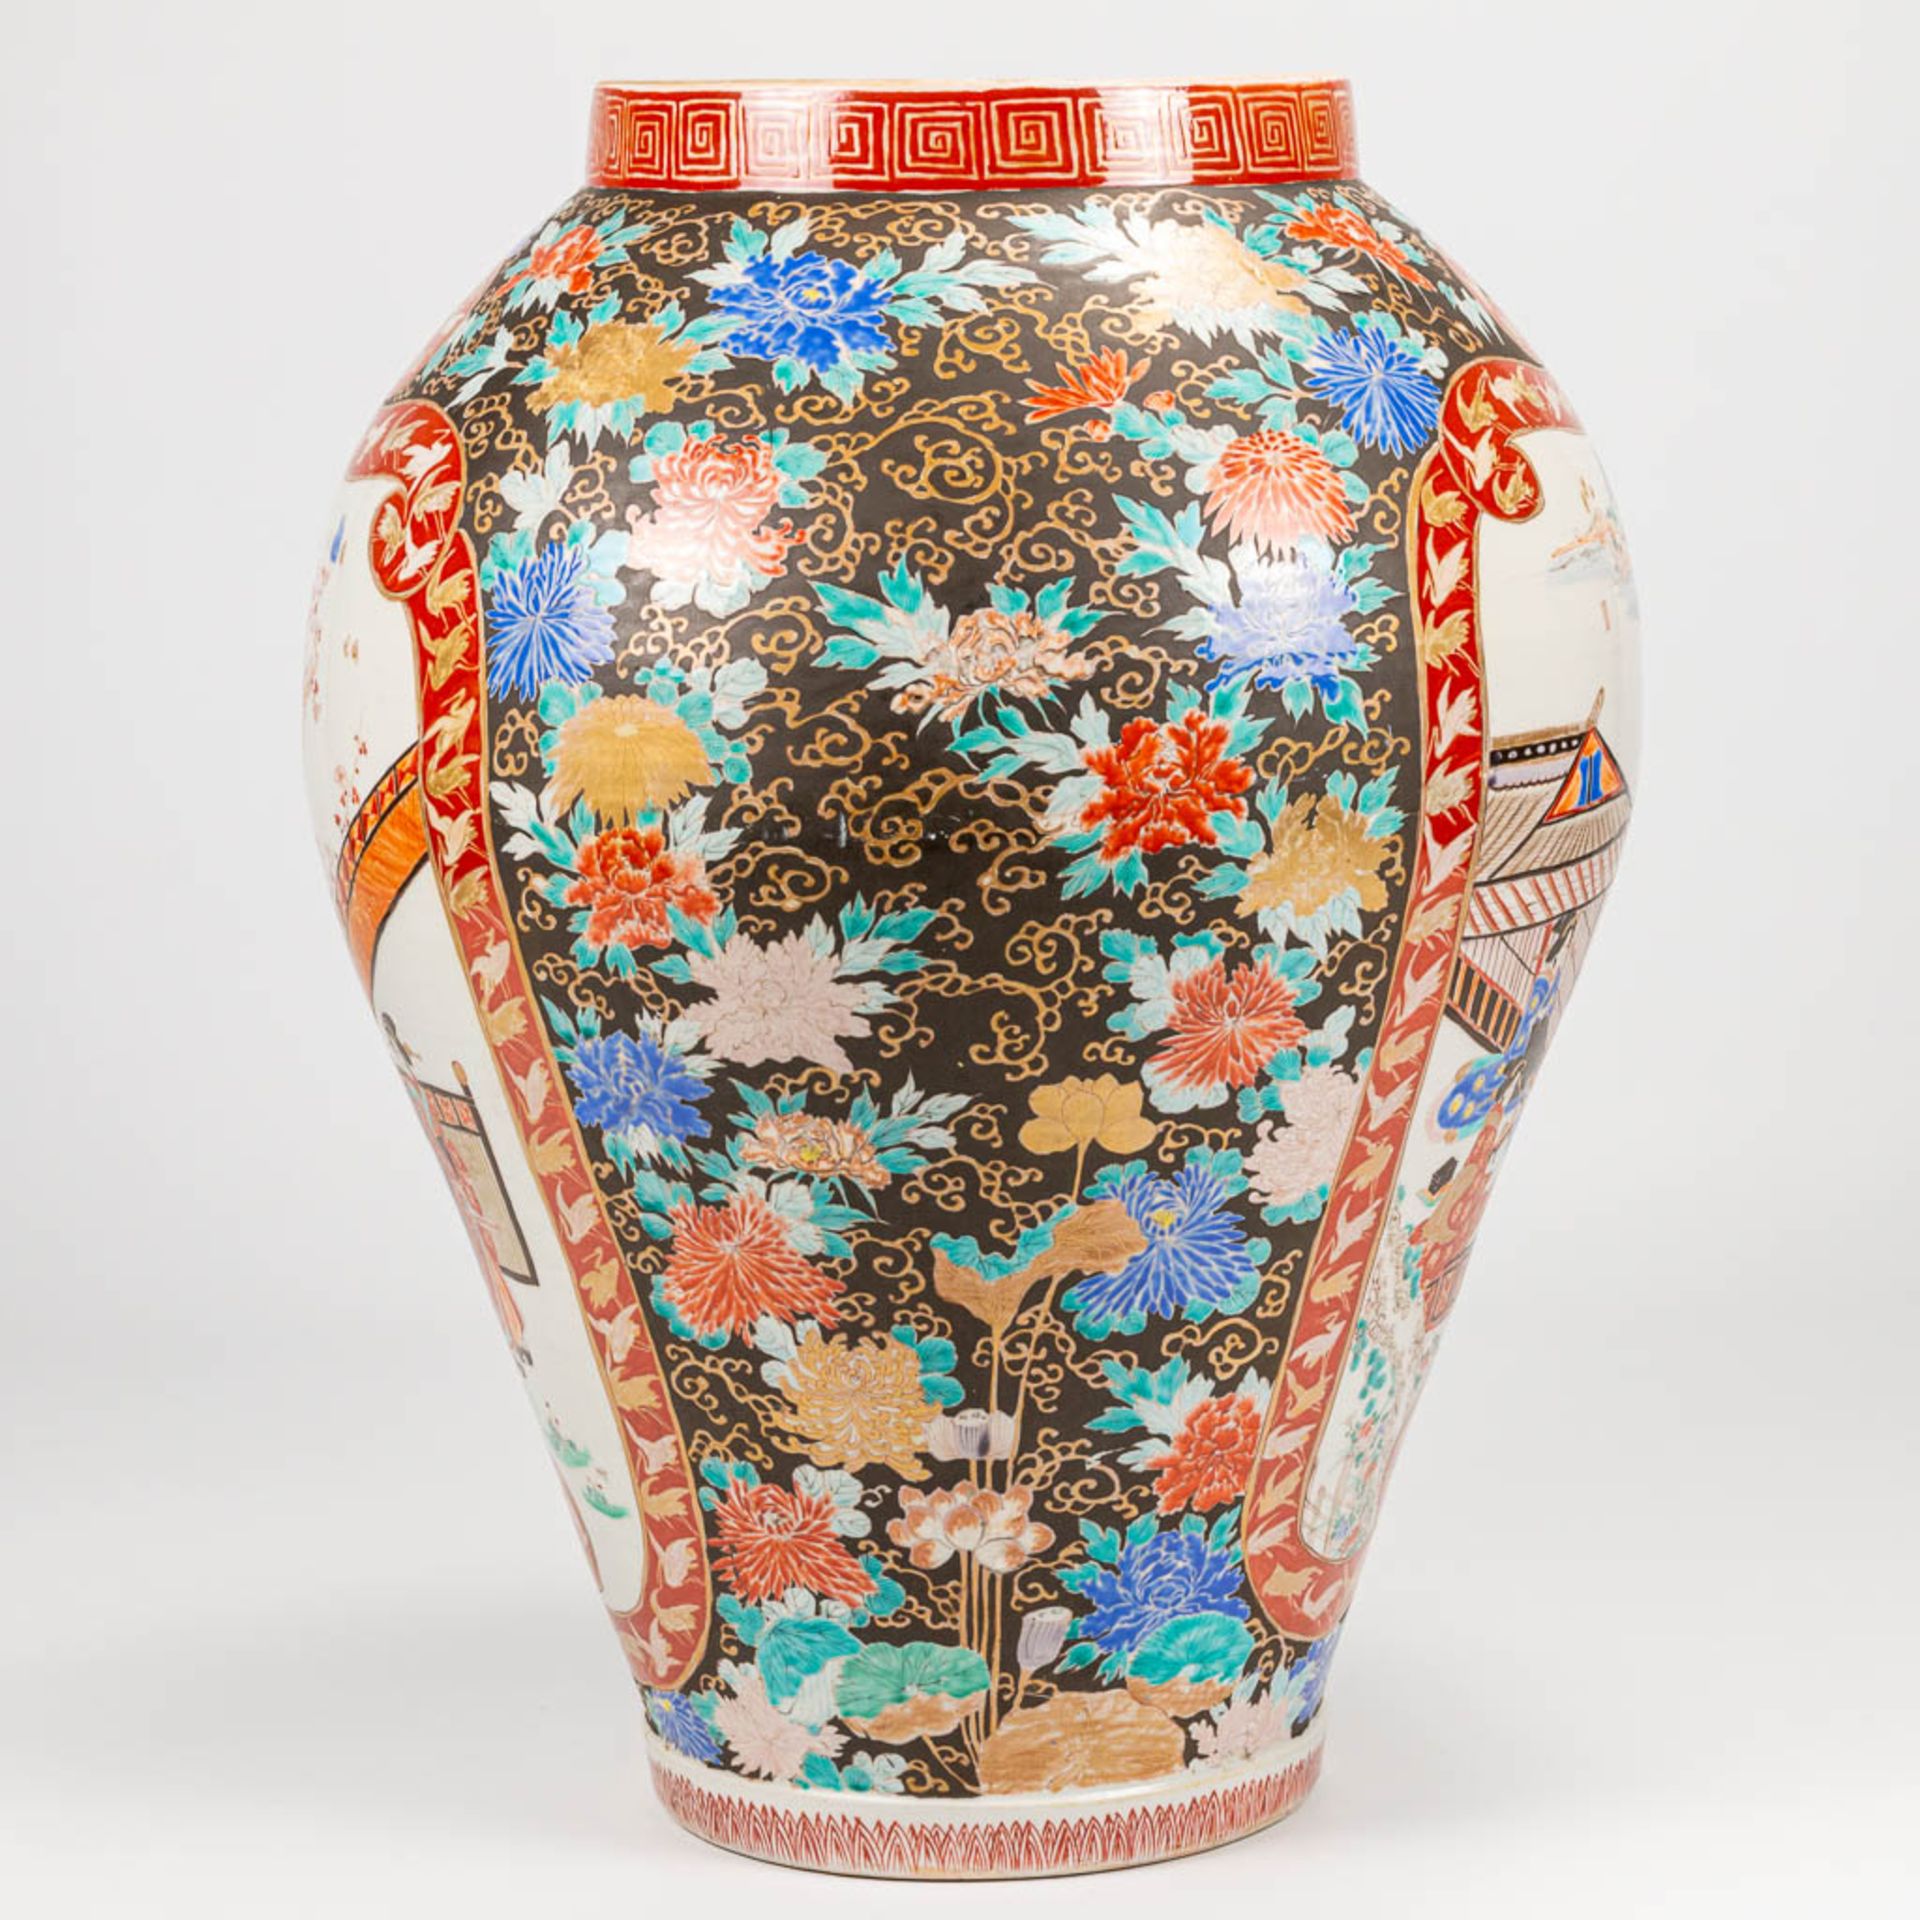 A large Imari display vase made of hand-painted porcelain in Japan. 19th/20th century. (60 x 42 cm) - Image 15 of 21